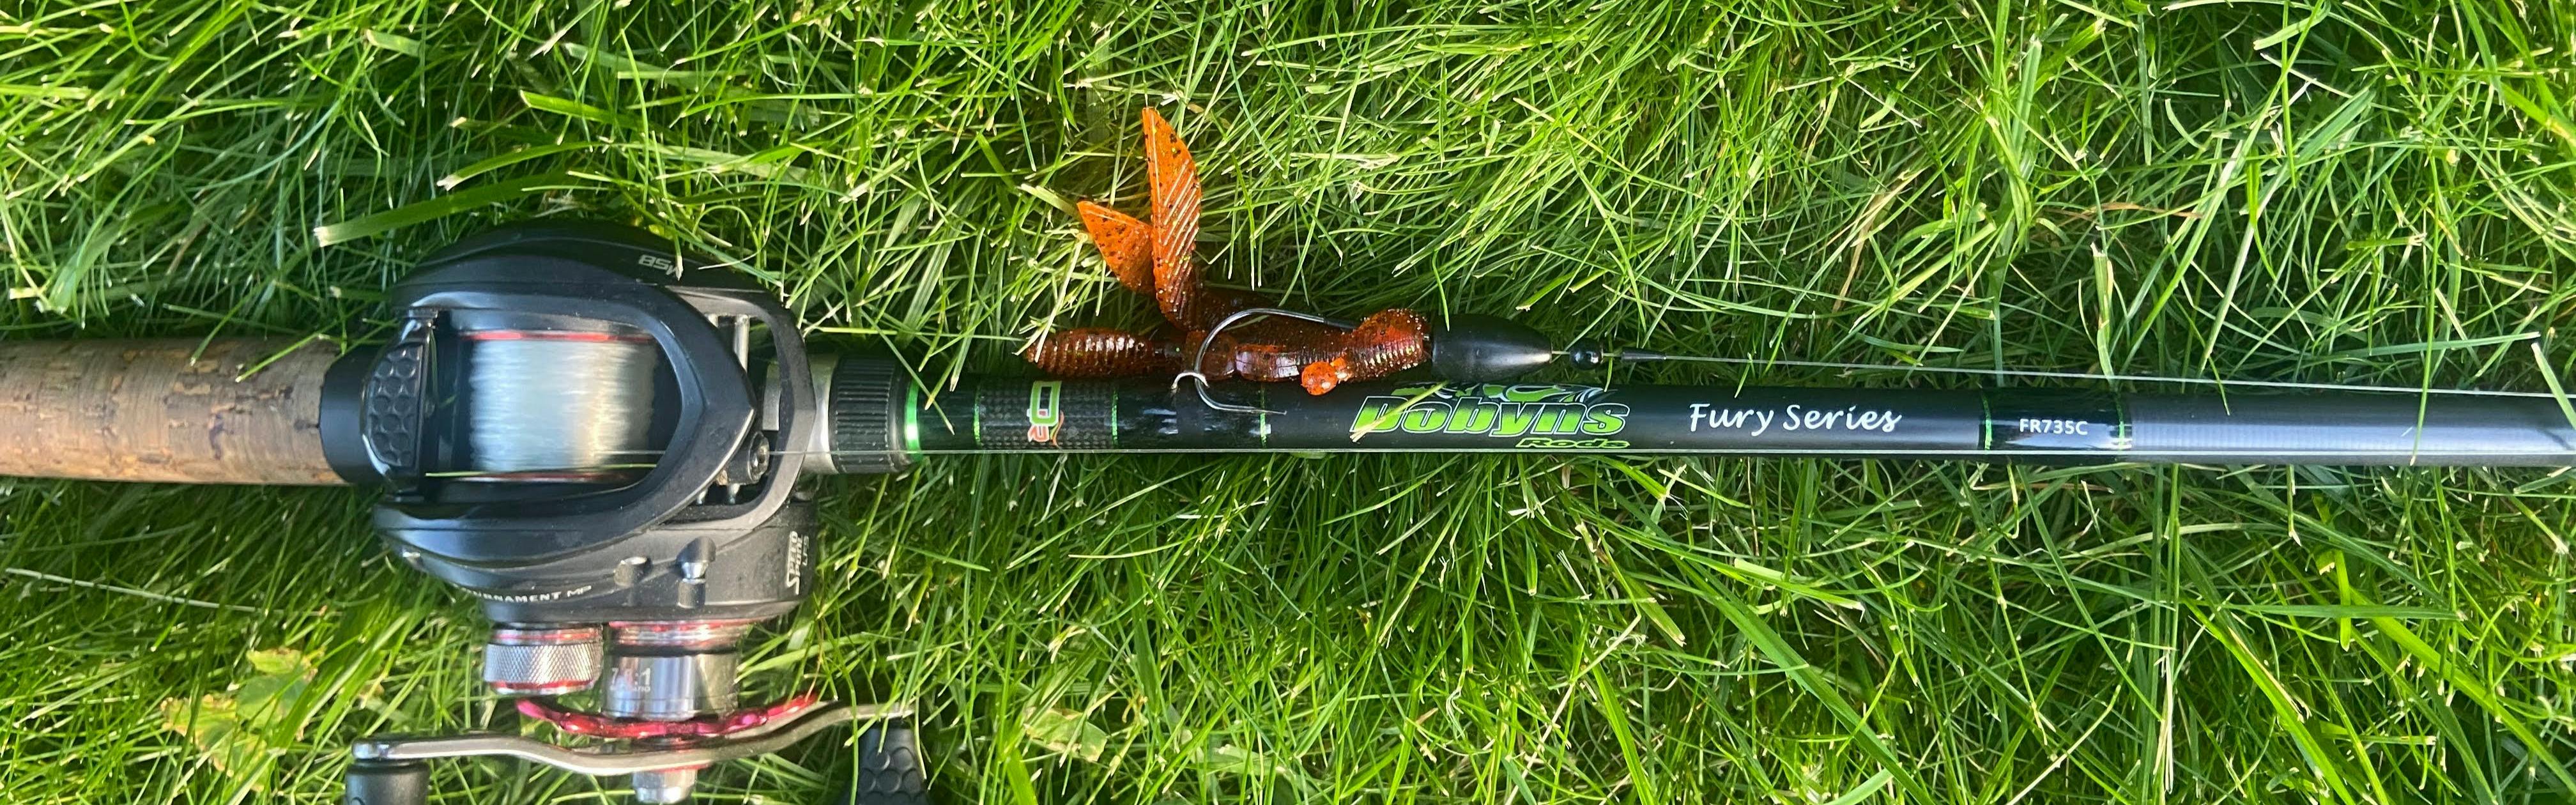 Expert Review: Dobyns Rods Fury